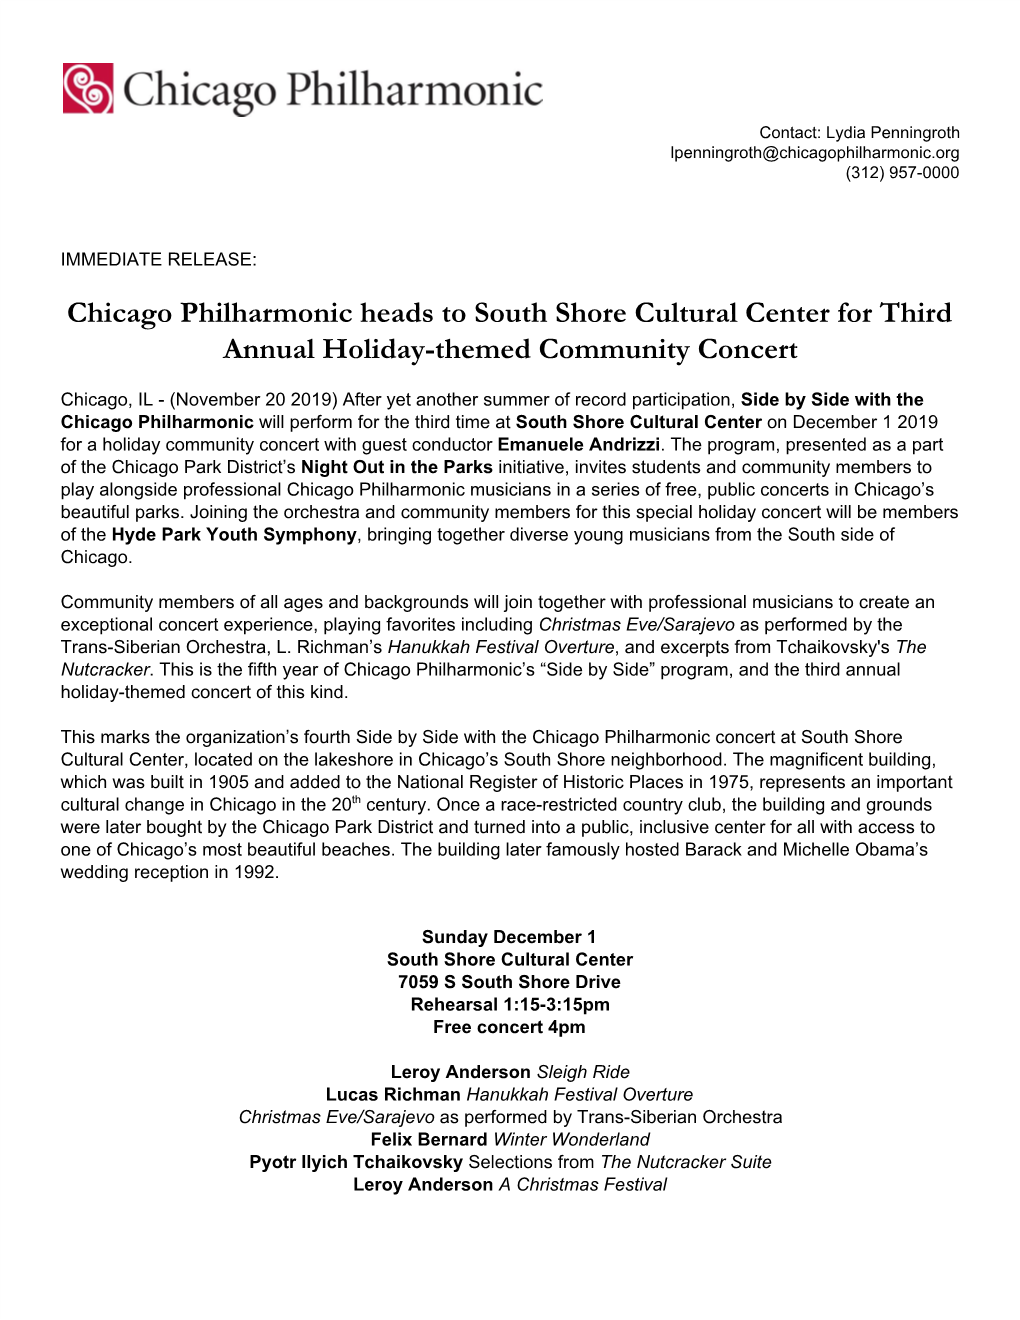 Chicago Philharmonic Heads to South Shore Cultural Center for Third Annual Holiday-Themed Community Concert